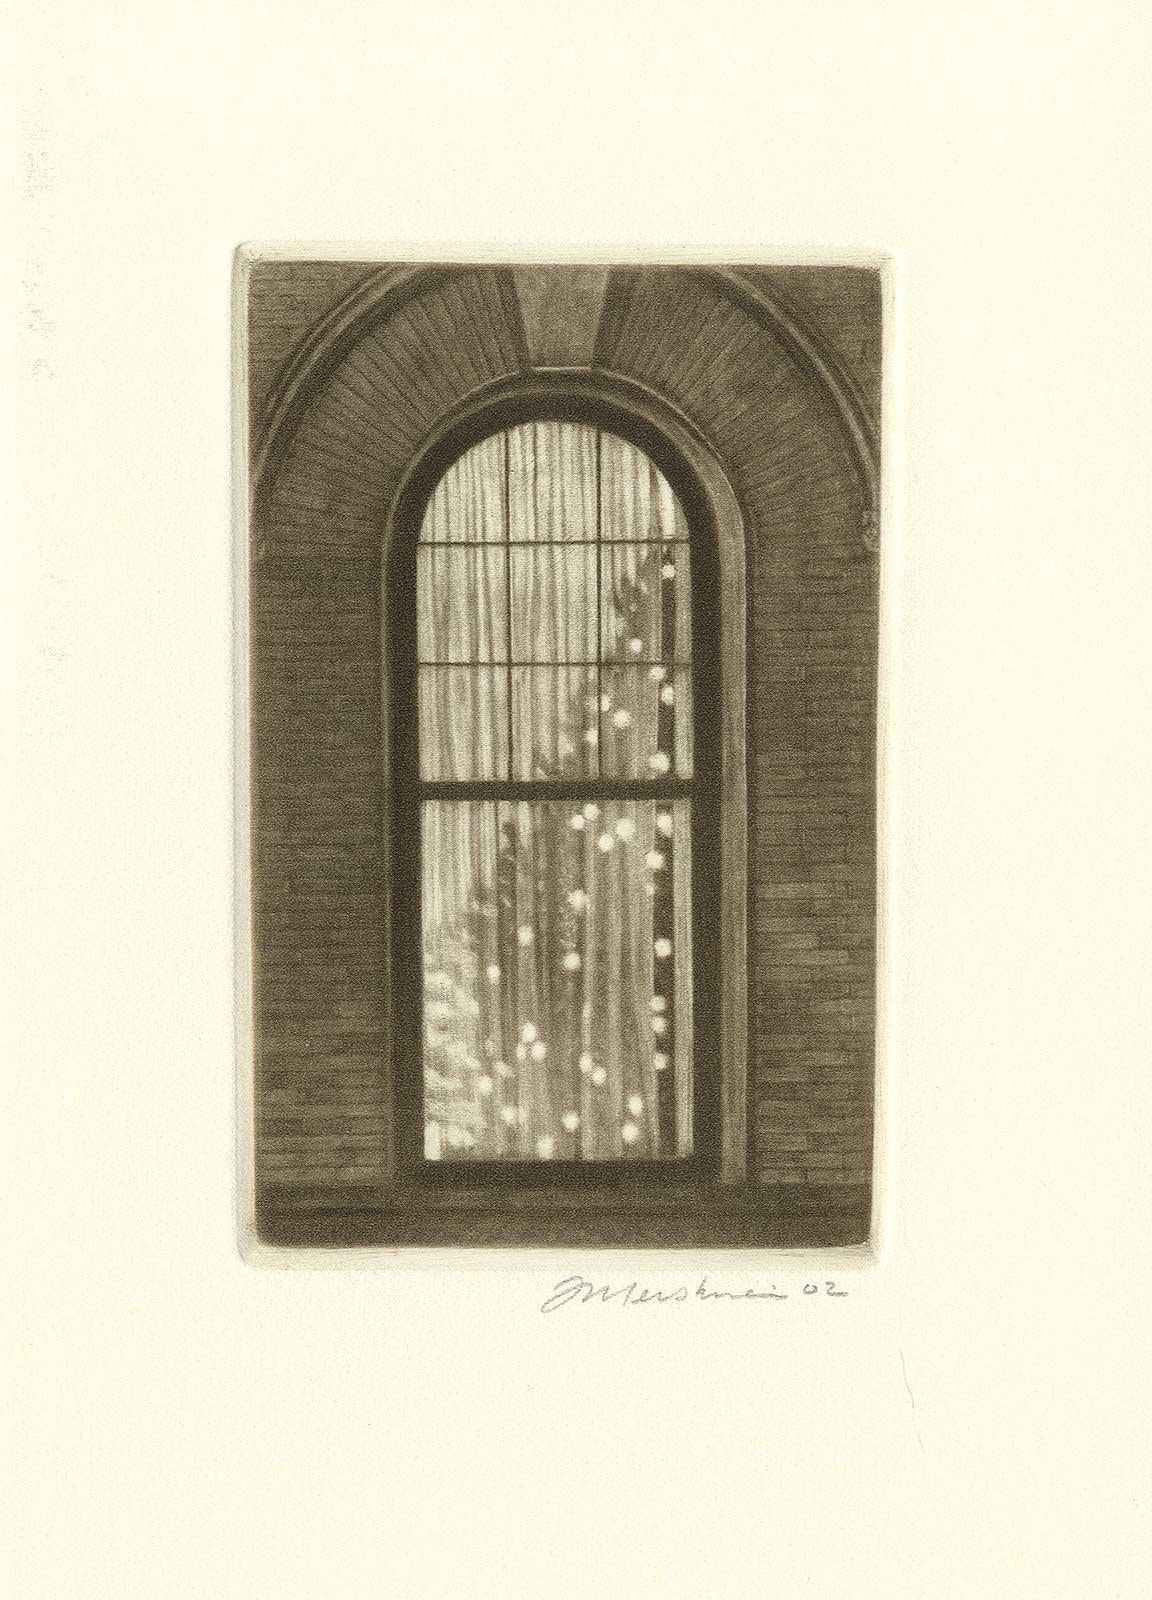 Peeking into the interior of a Brooklyn Brownstone at a festive tree

Frederick Mershimer (American, b. 1958)
Moody, mysterious, majestic – these are some of the ways to describe the mezzotints of Frederick Mershimer. His images travel through the